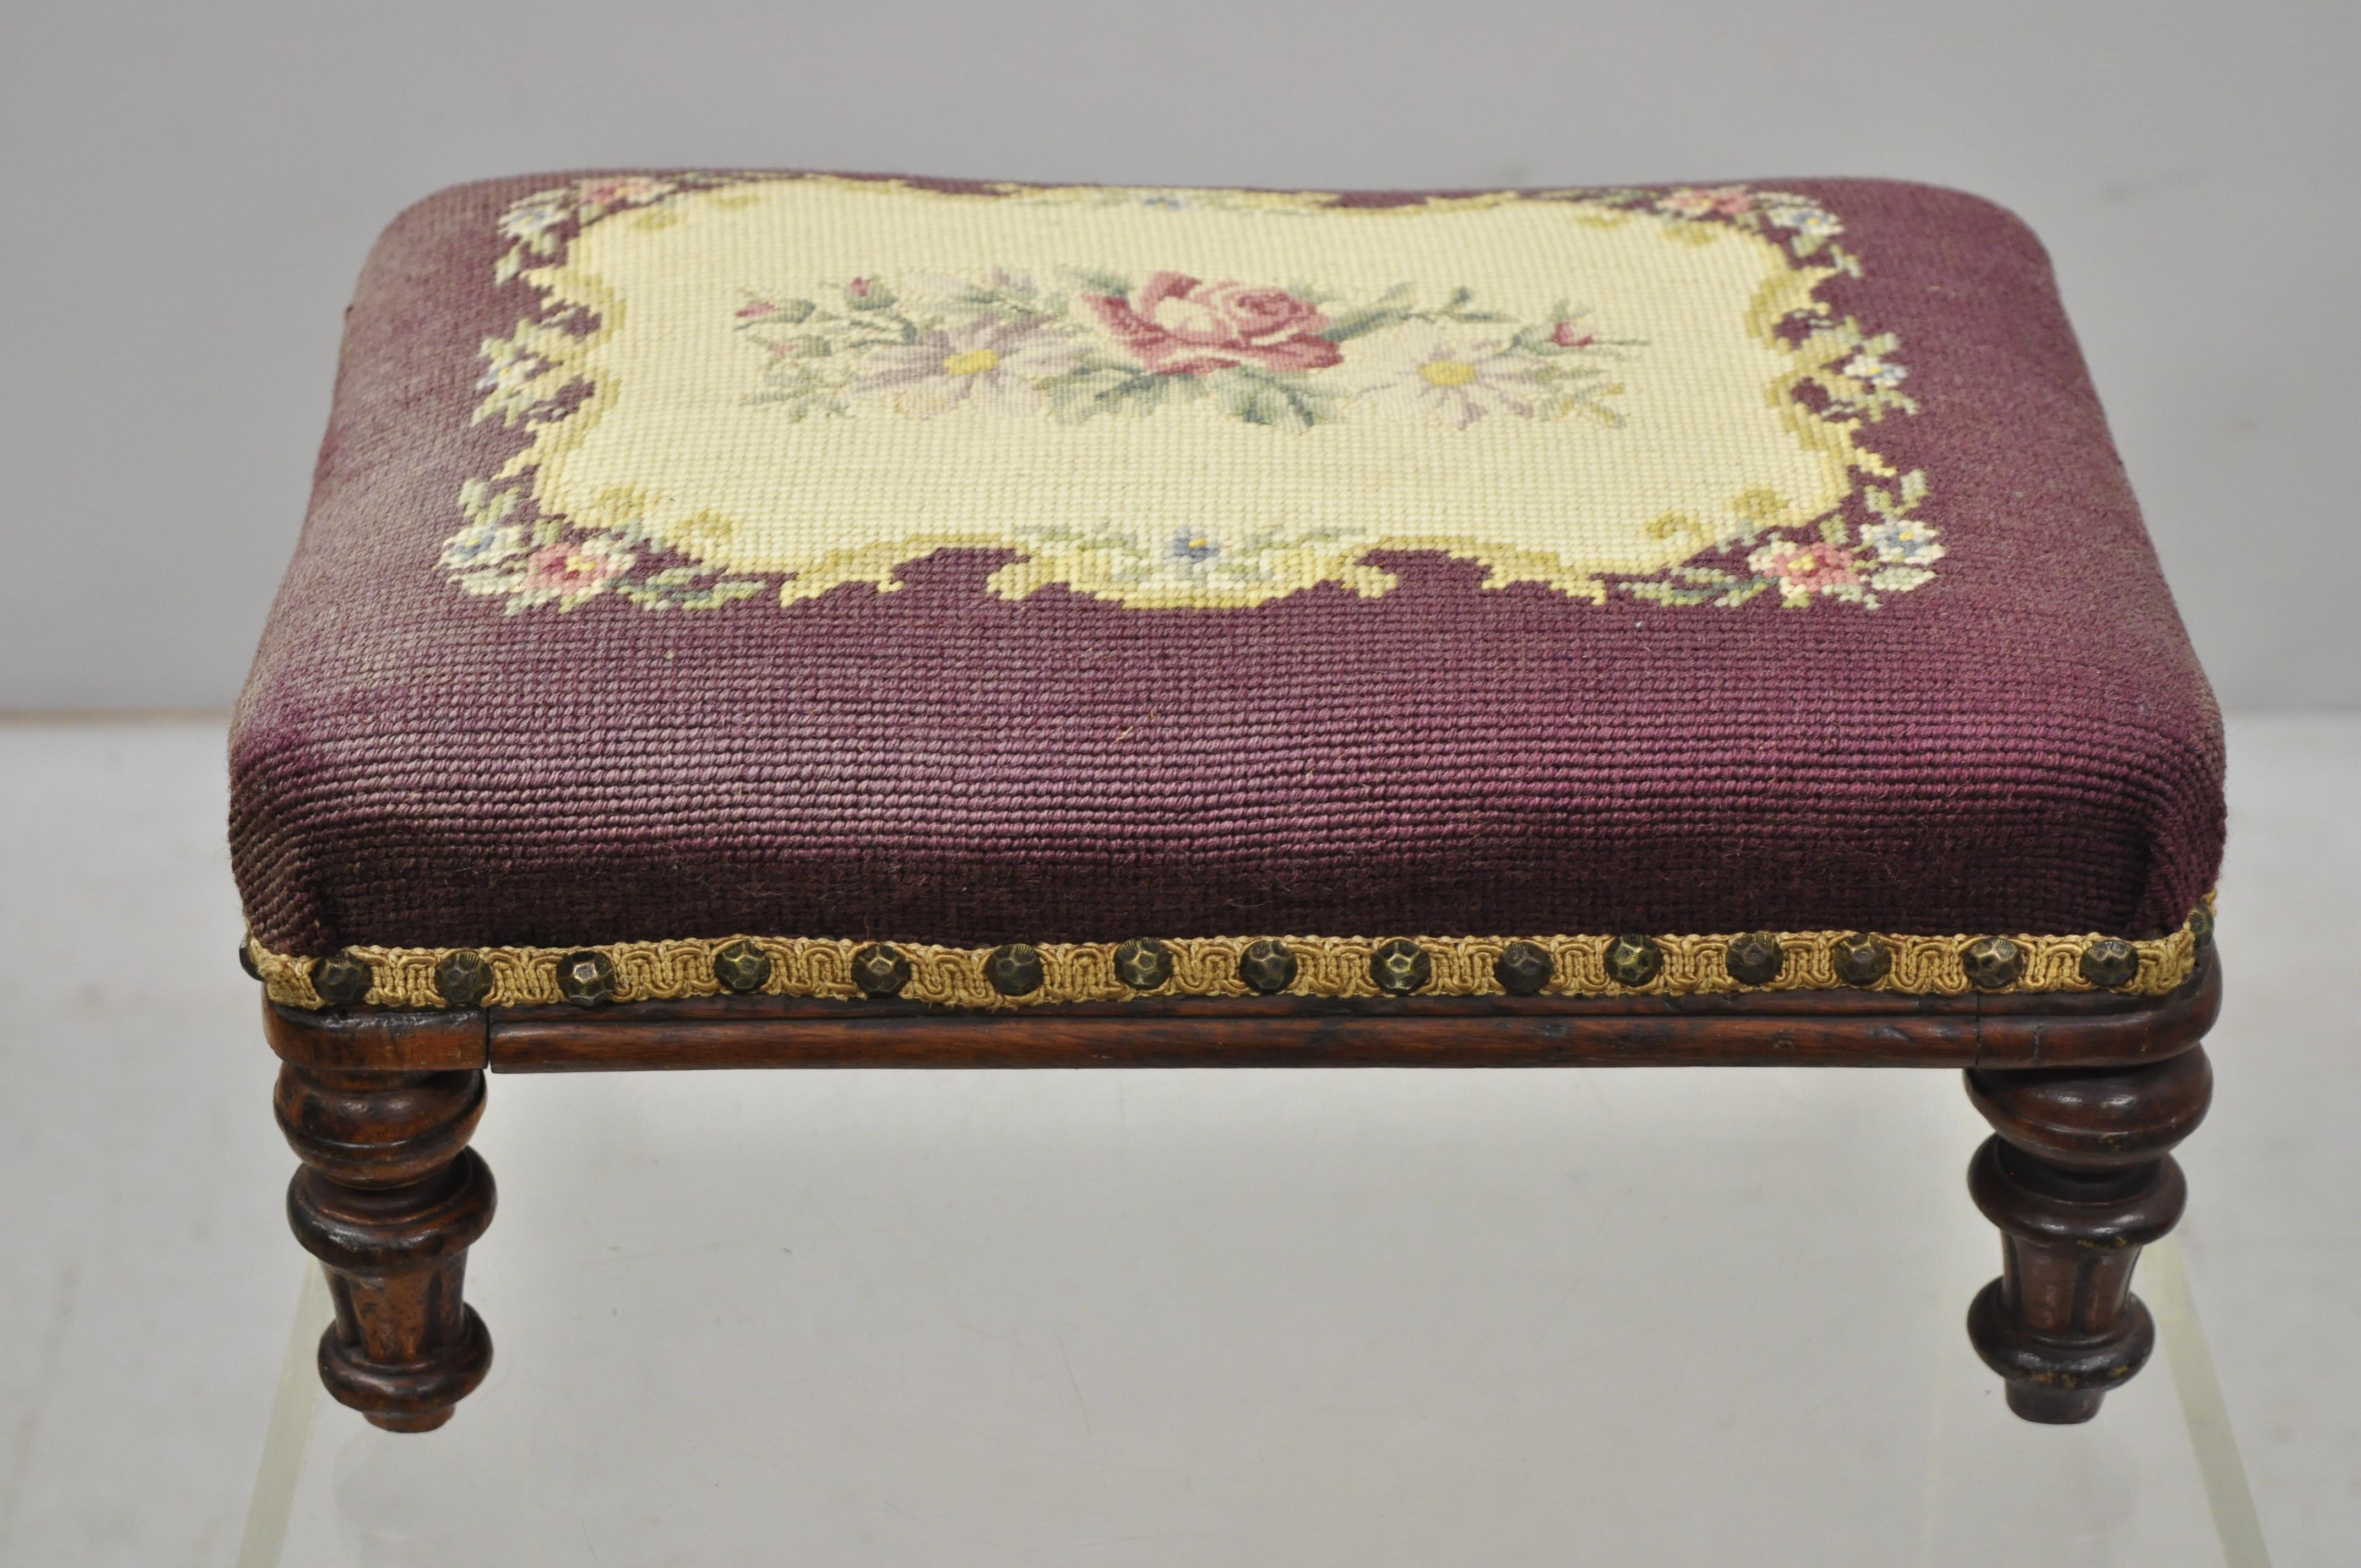 Antique petite small Victorian Empire mahogany needlepoint footstool ottoman. Item includes a floral needlepoint seat, solid wood frame, beautiful wood grain, nicely carved details, tapered legs, very nice antique item, circa late 19th-early 20th